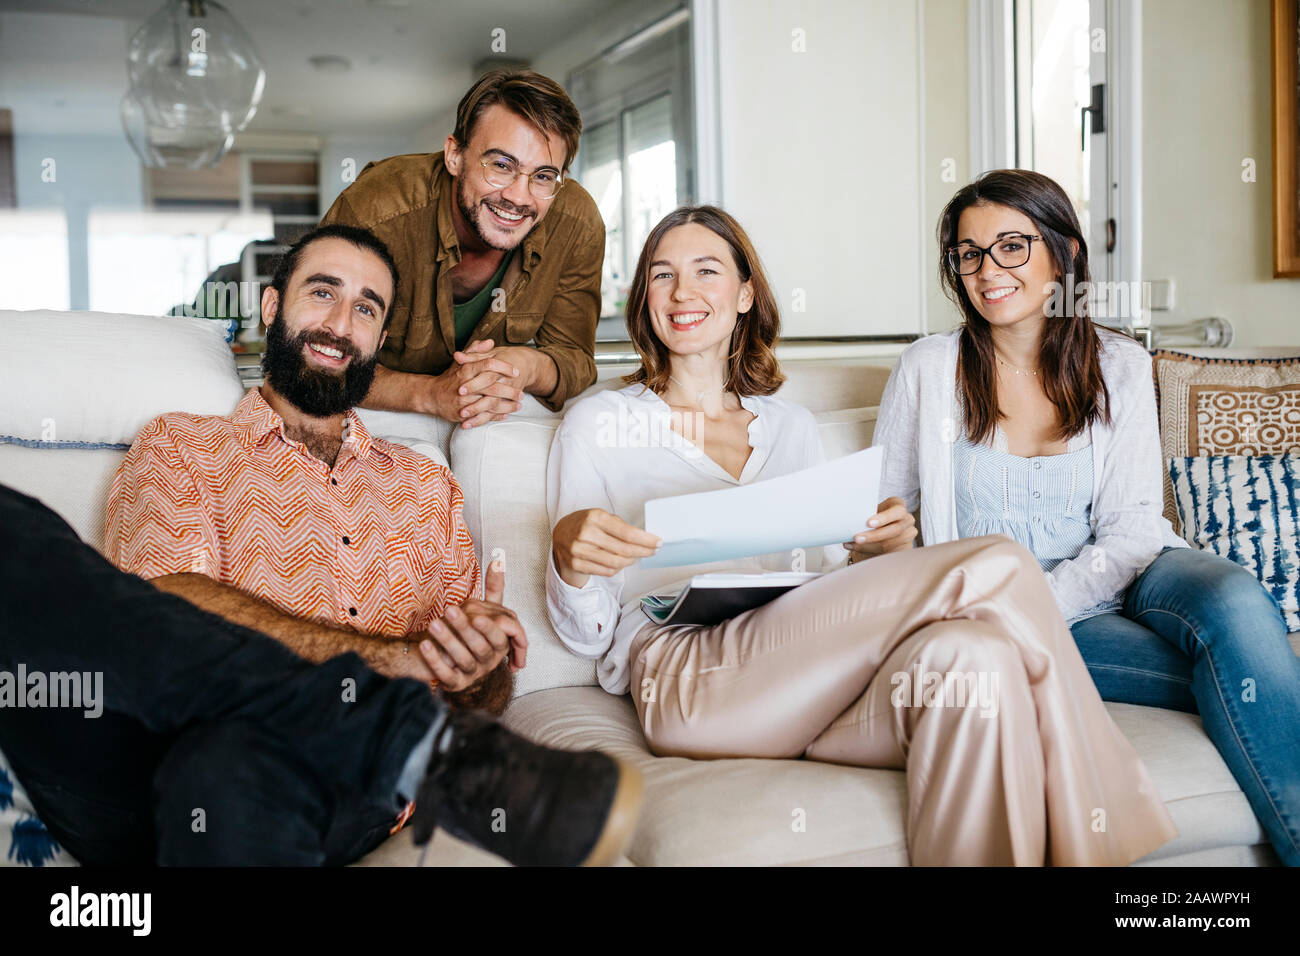 Portrait of happy friends sitting on couch with papers Stock Photo